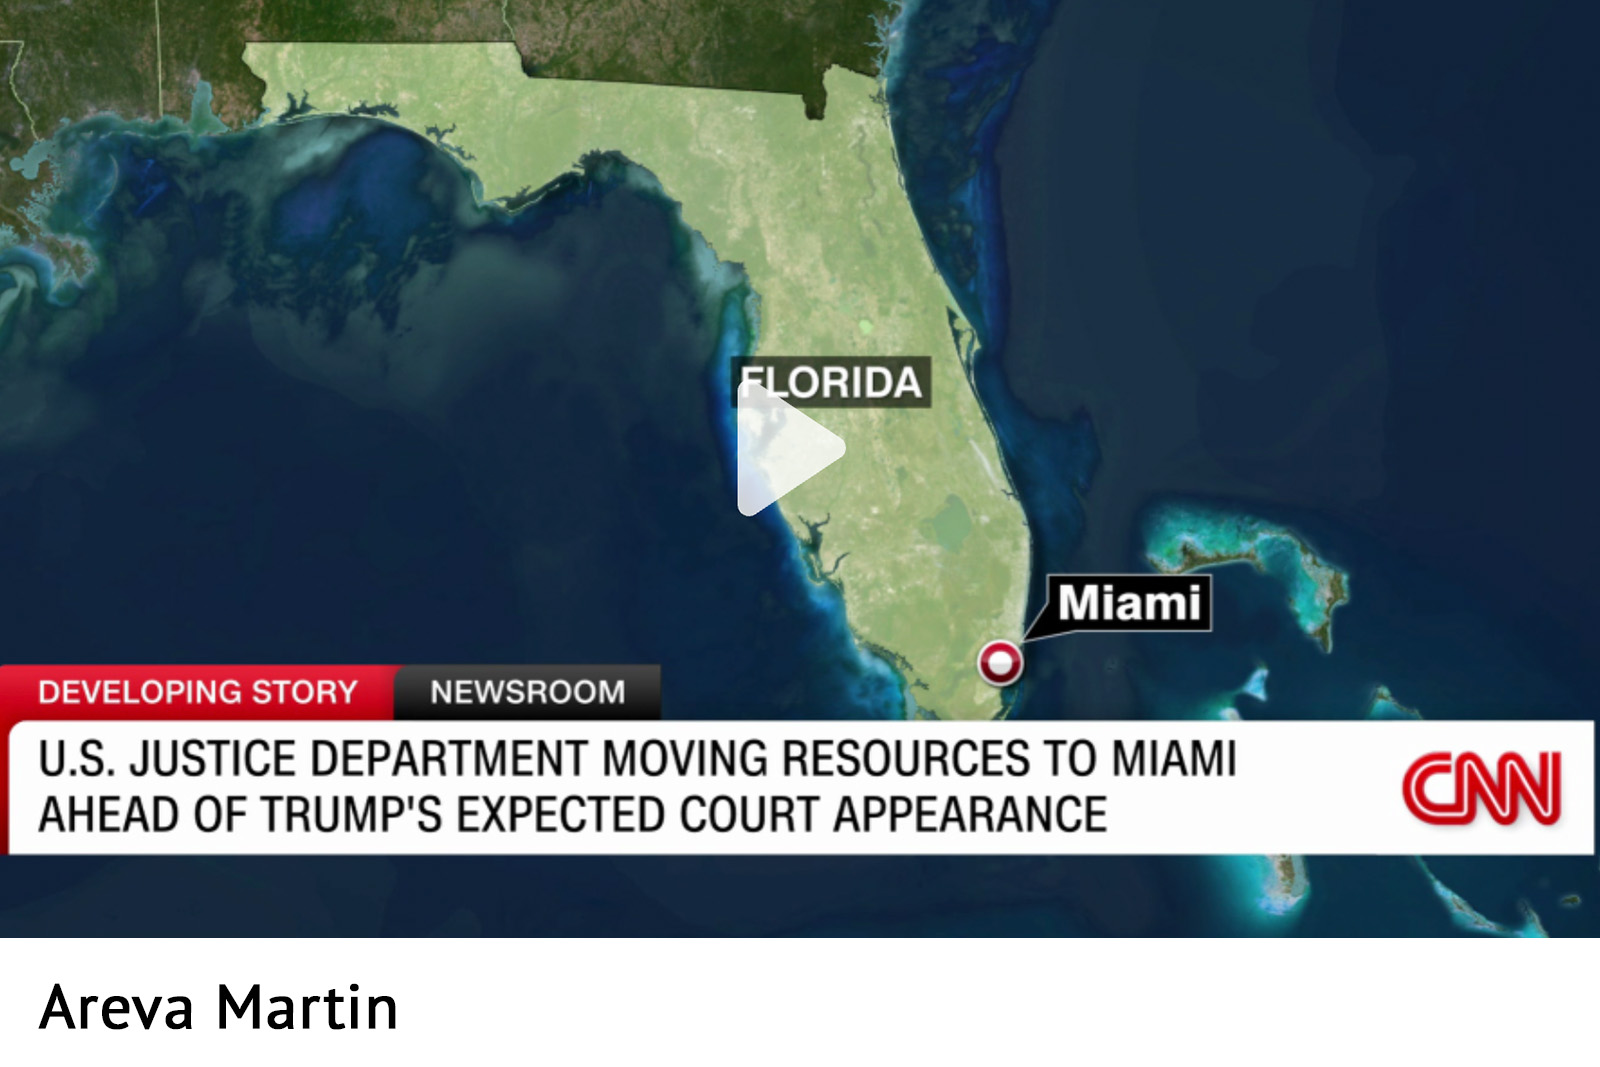 Areva Martin Donald Trump faces serious charges